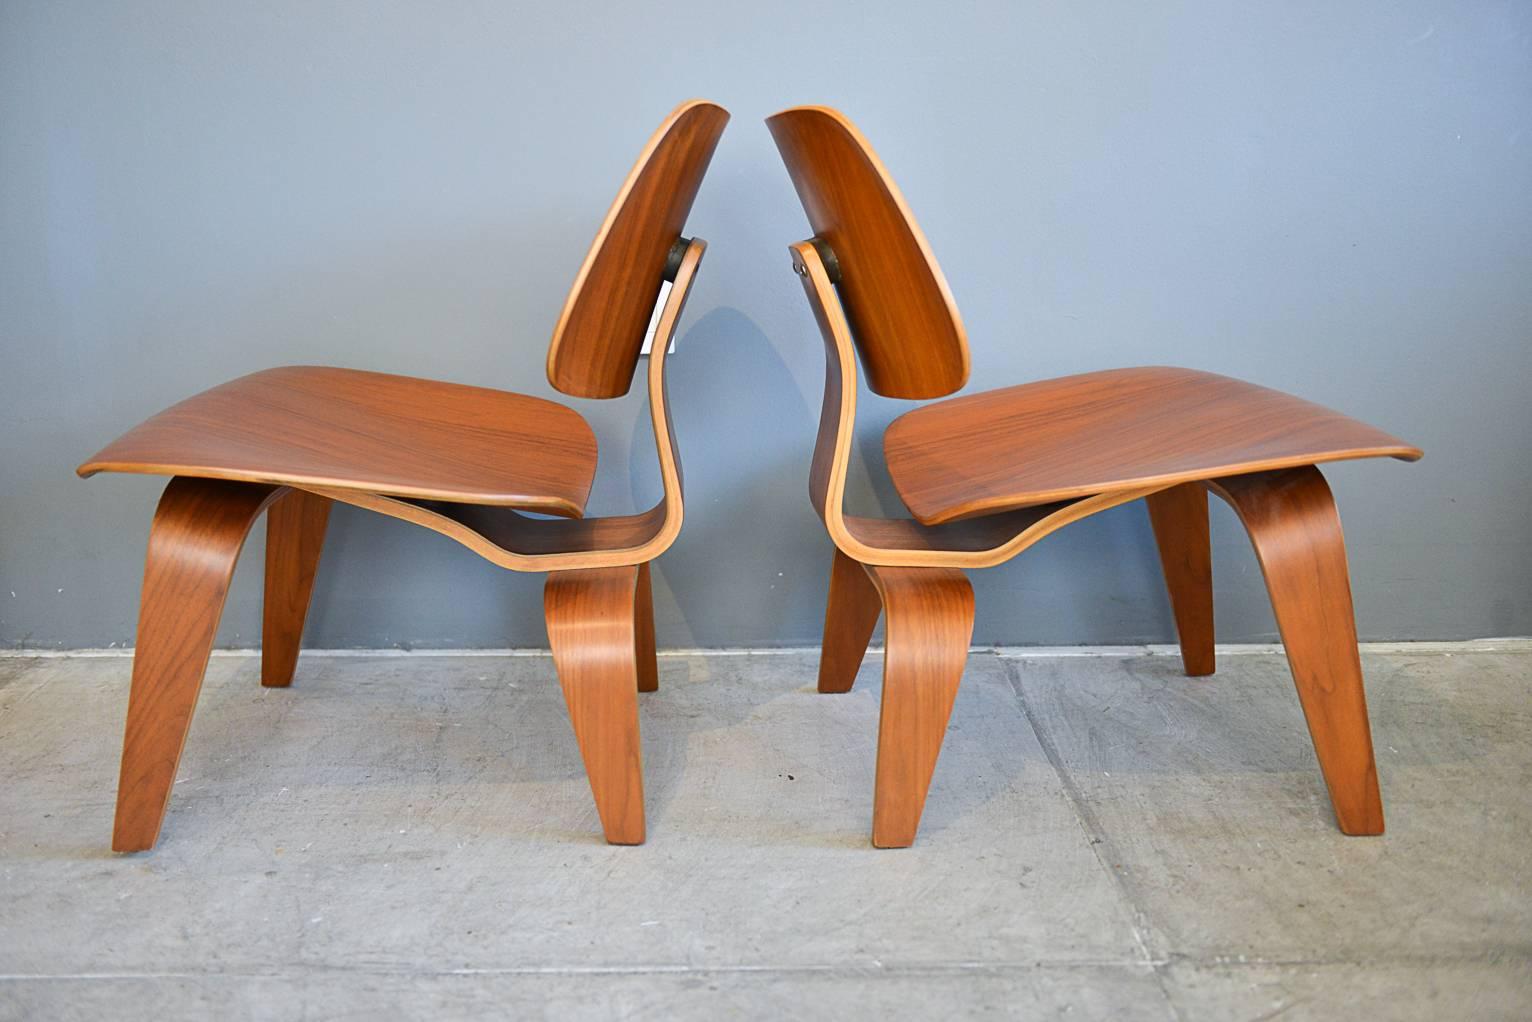 Beautiful and matching pair of Charles Eames LCW lounge chairs with great honey patina. Excellent original condition, circa 1980s. Hardly used with original screws and feet. One chair has had oval back shock mount replaced, otherwise excellent.